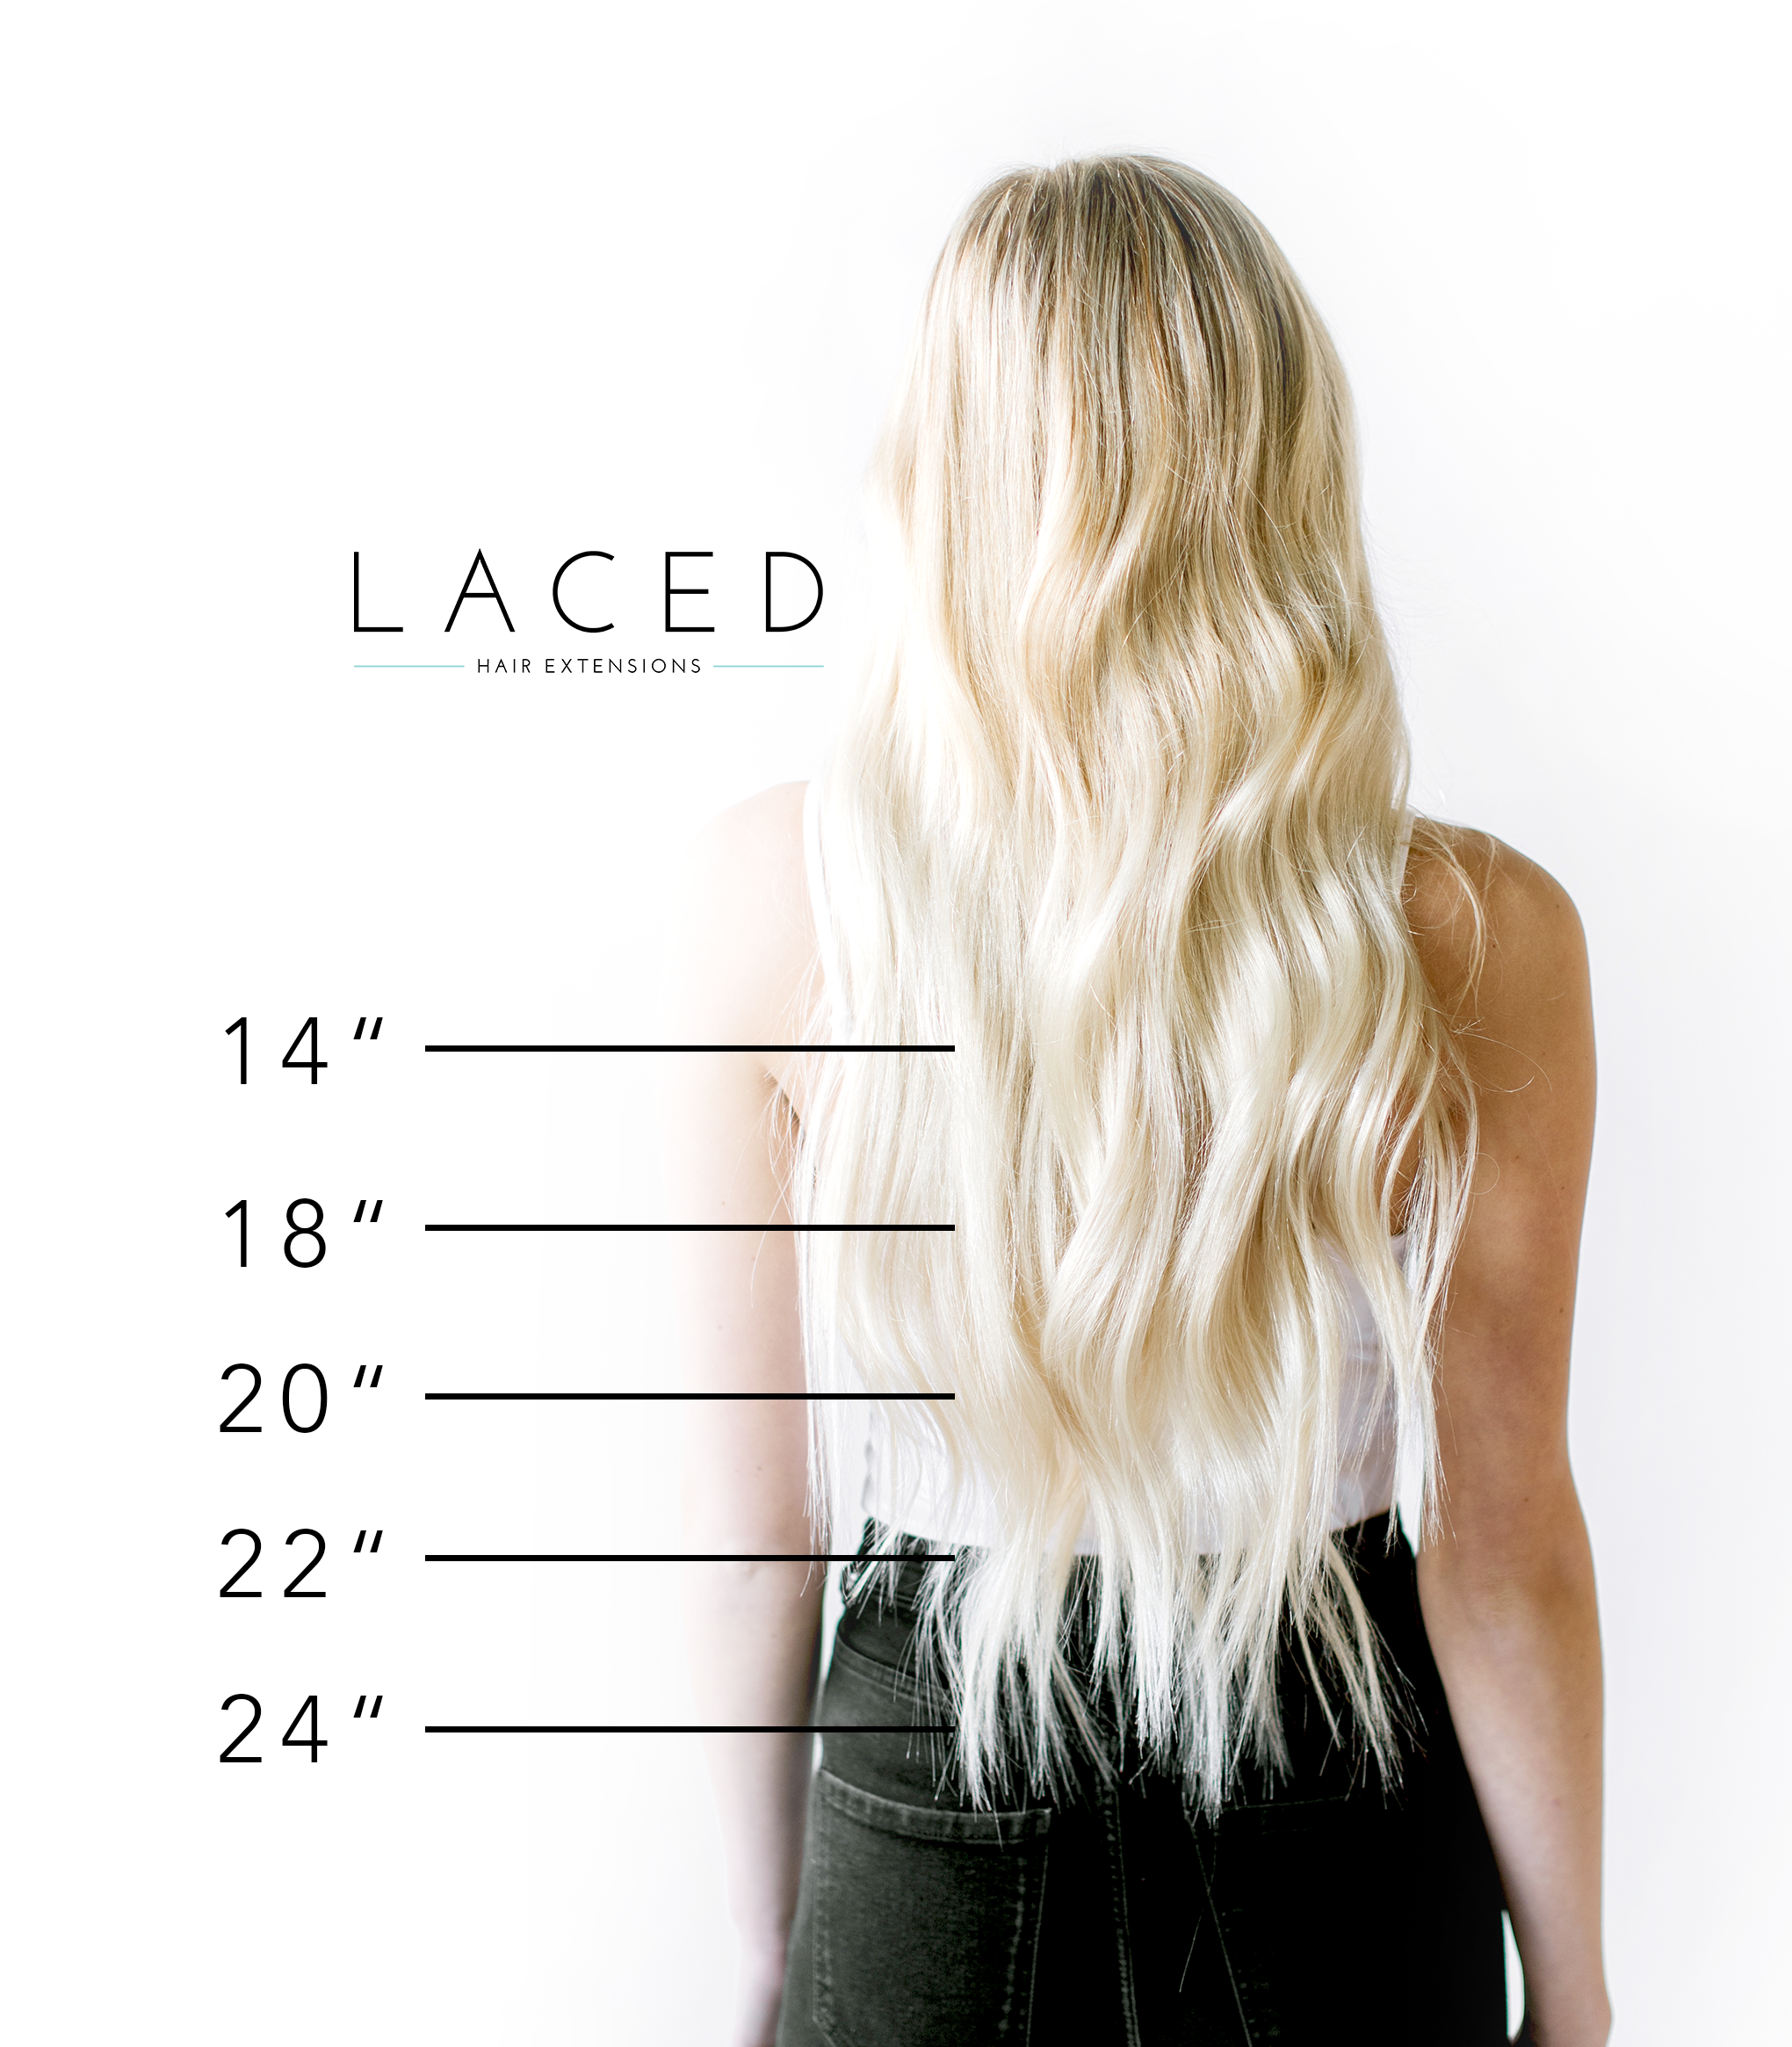 Laced Hair Length Options